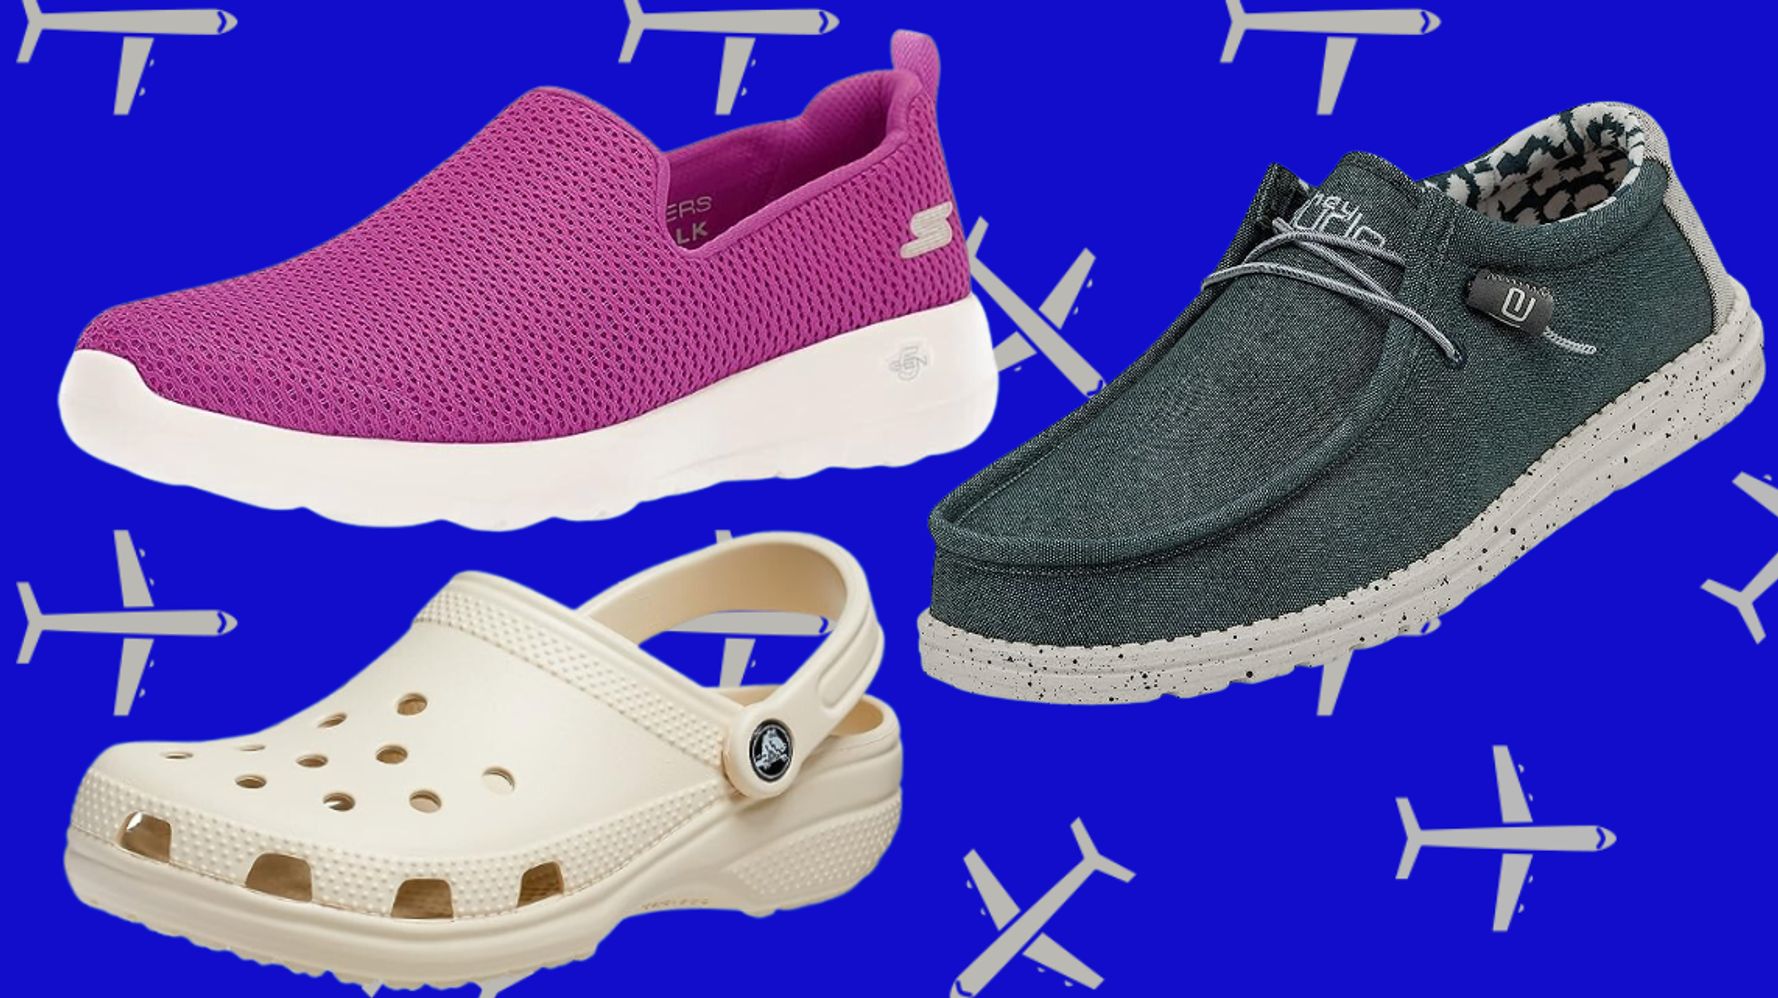 Best Slip-On Shoes To Get Through Airport Security Fast